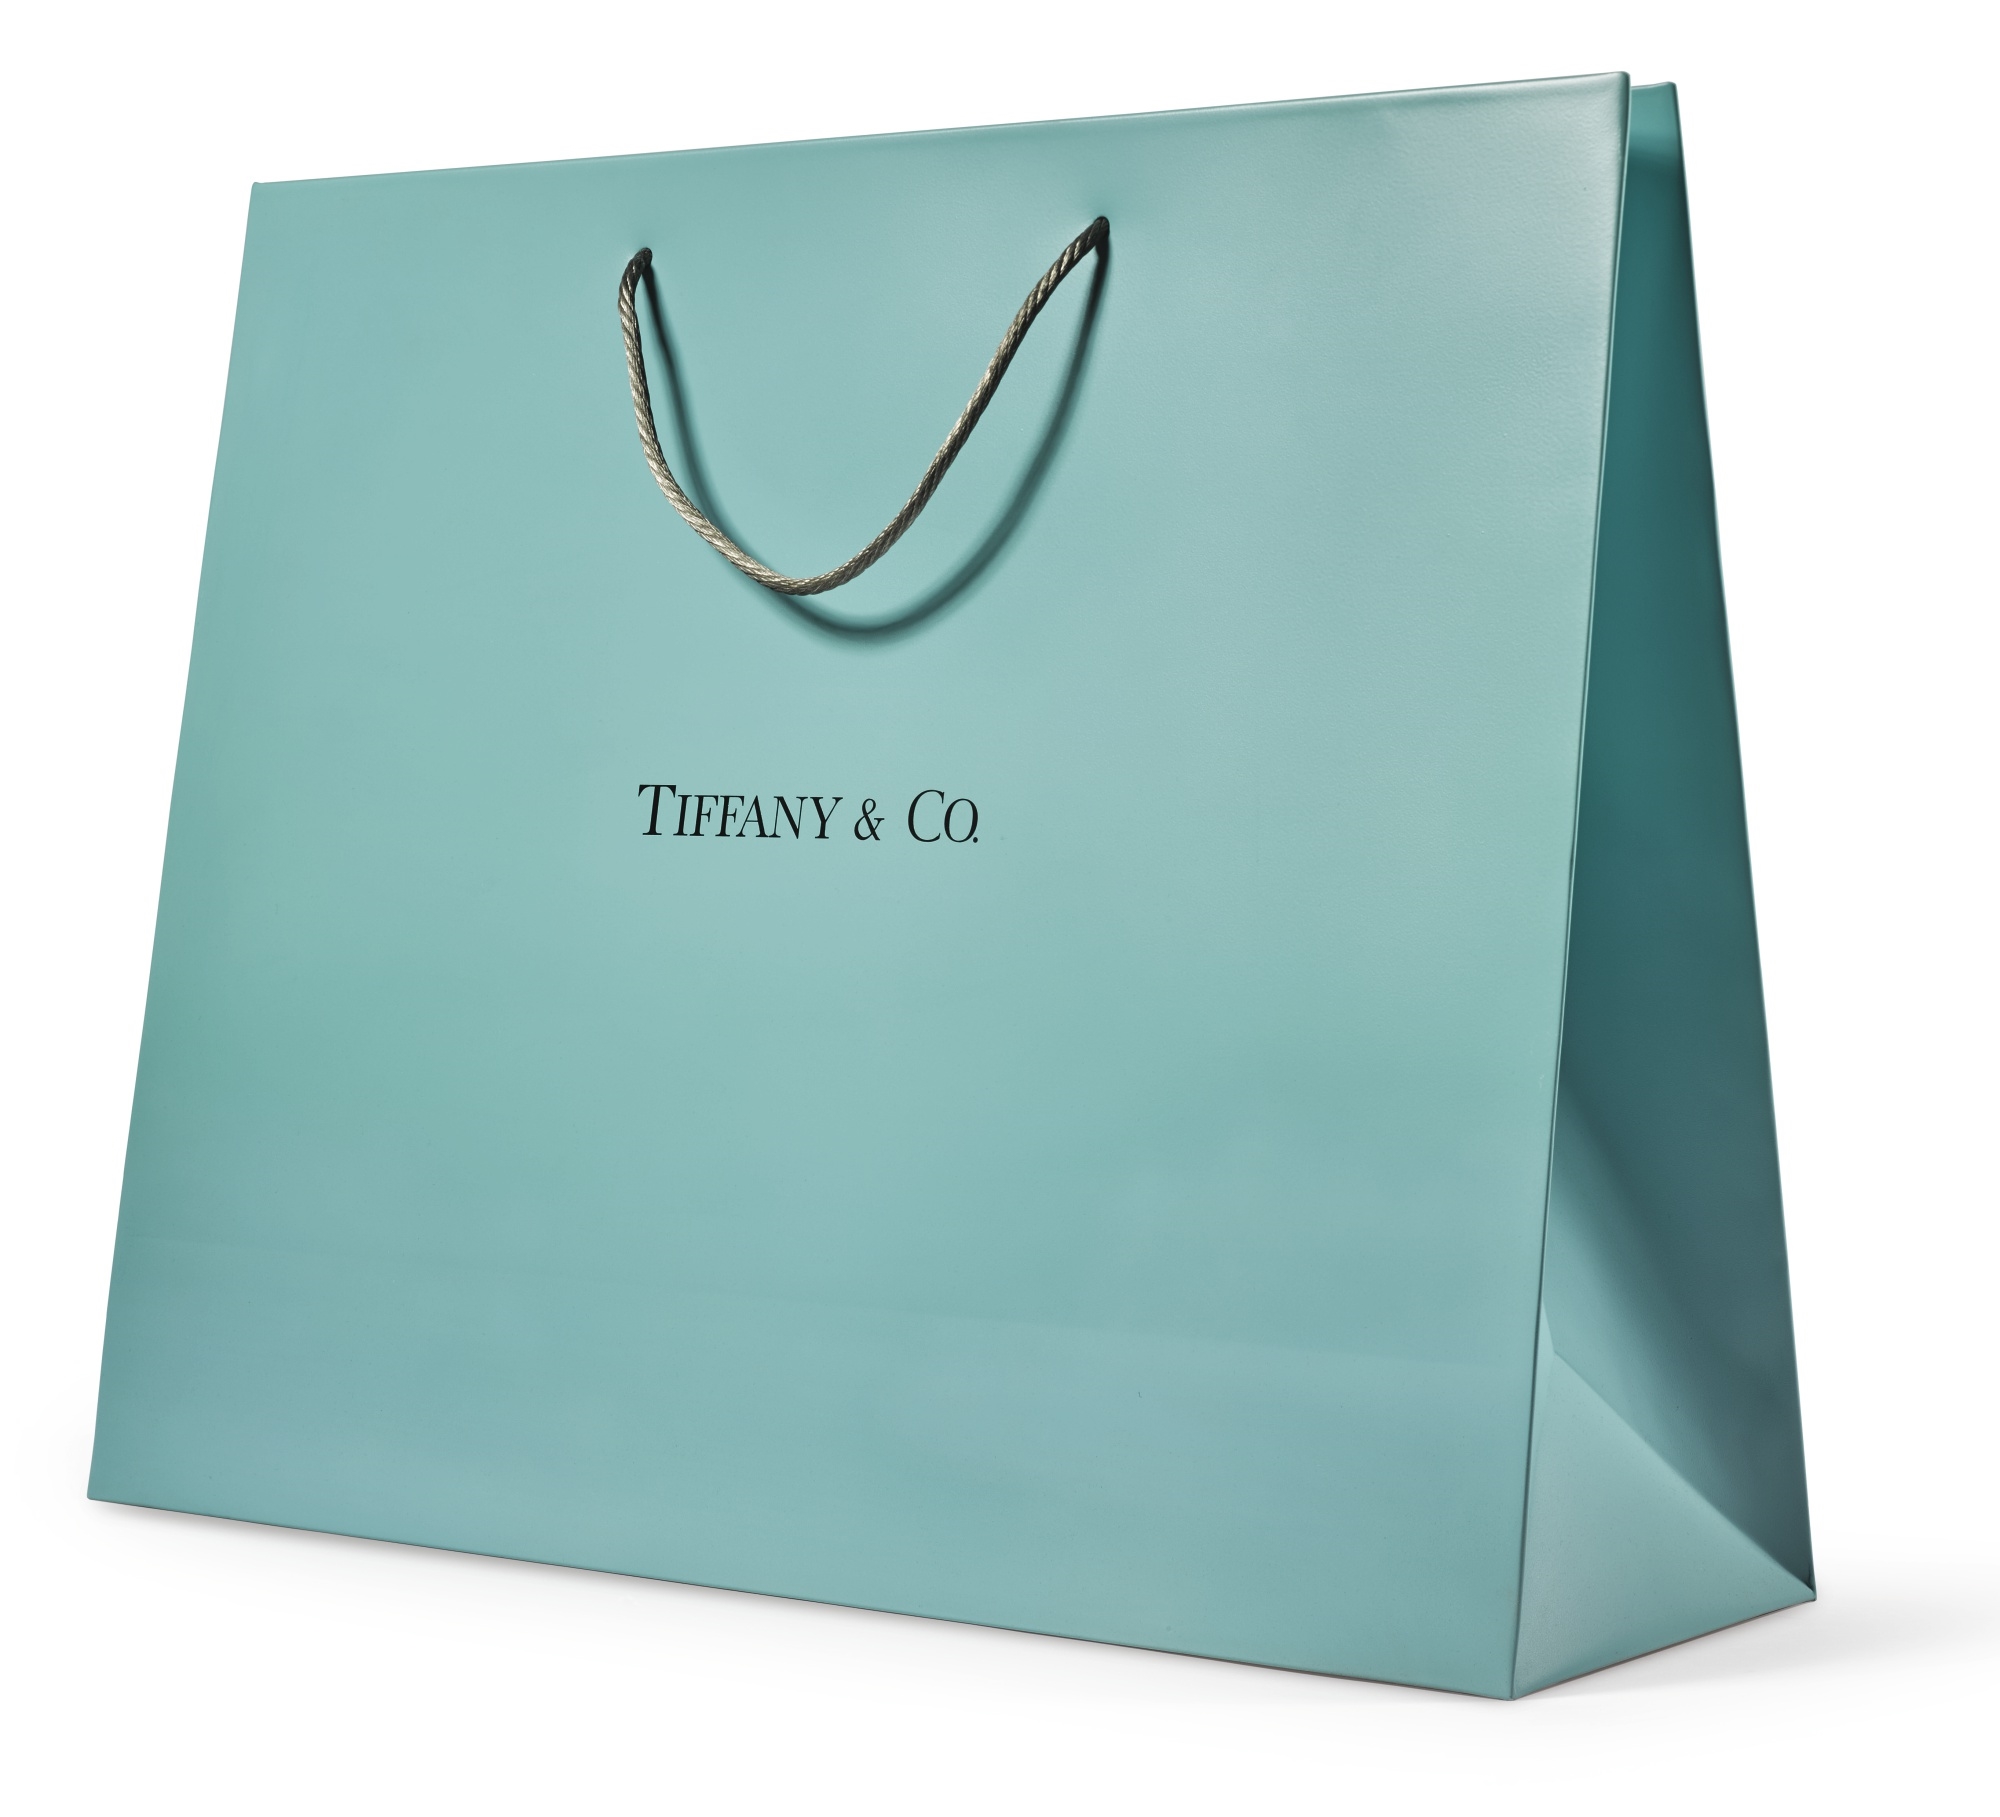 Tiffany & Co. Shopping Bag  National Museum of American History